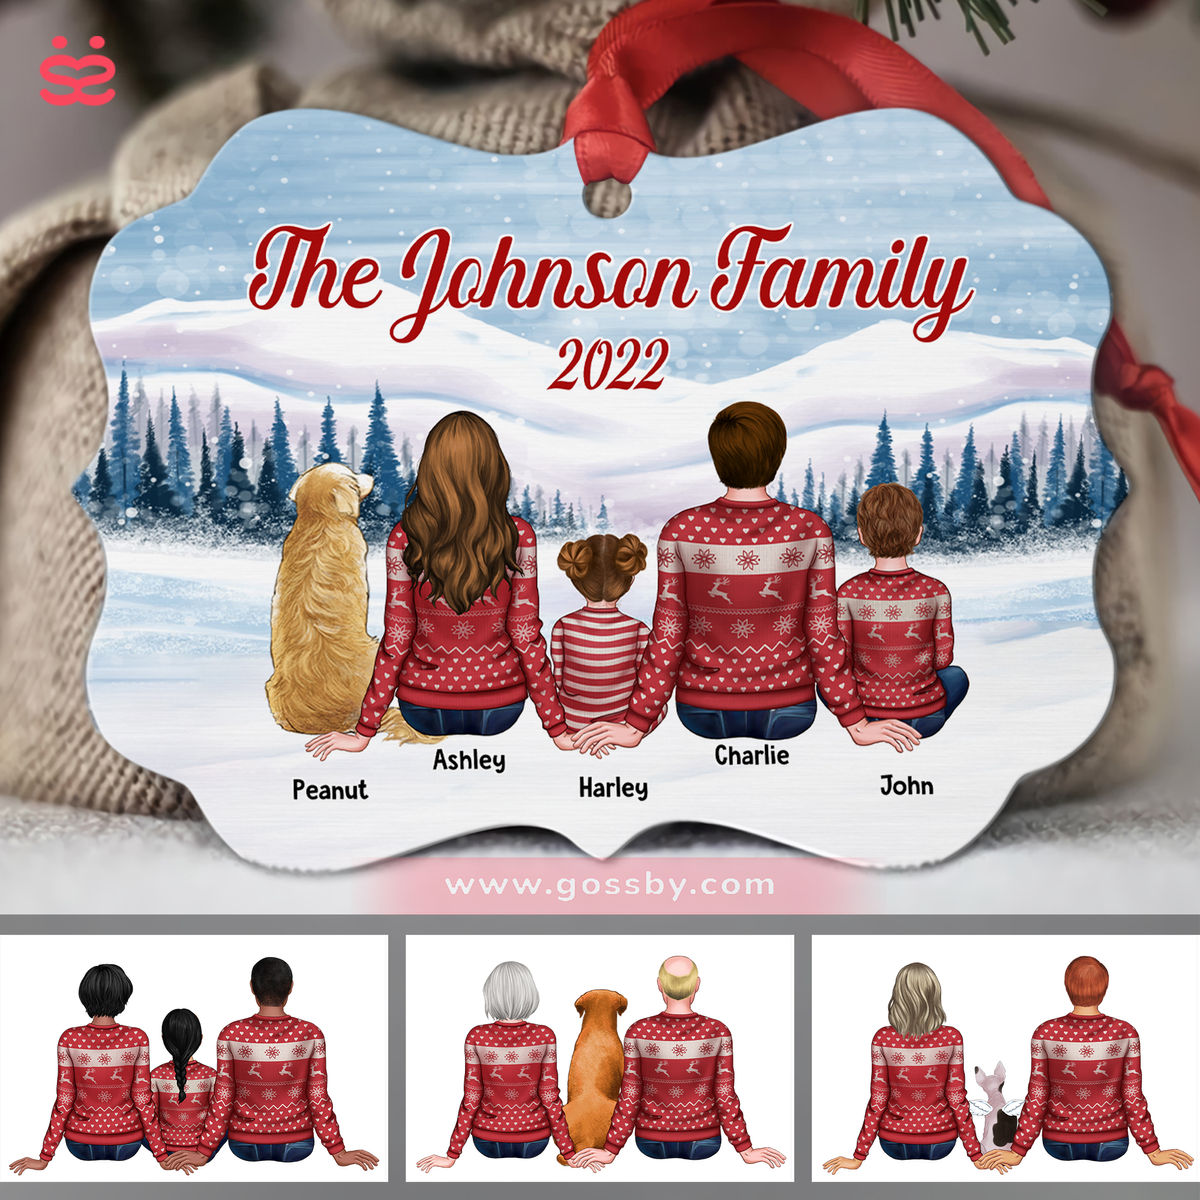 Christmas Gifts - Family Ugly Sweatshirt In Snow Back View Personalized - Custom Ornament (Christmas Gifts For Women, Men, Family Members)